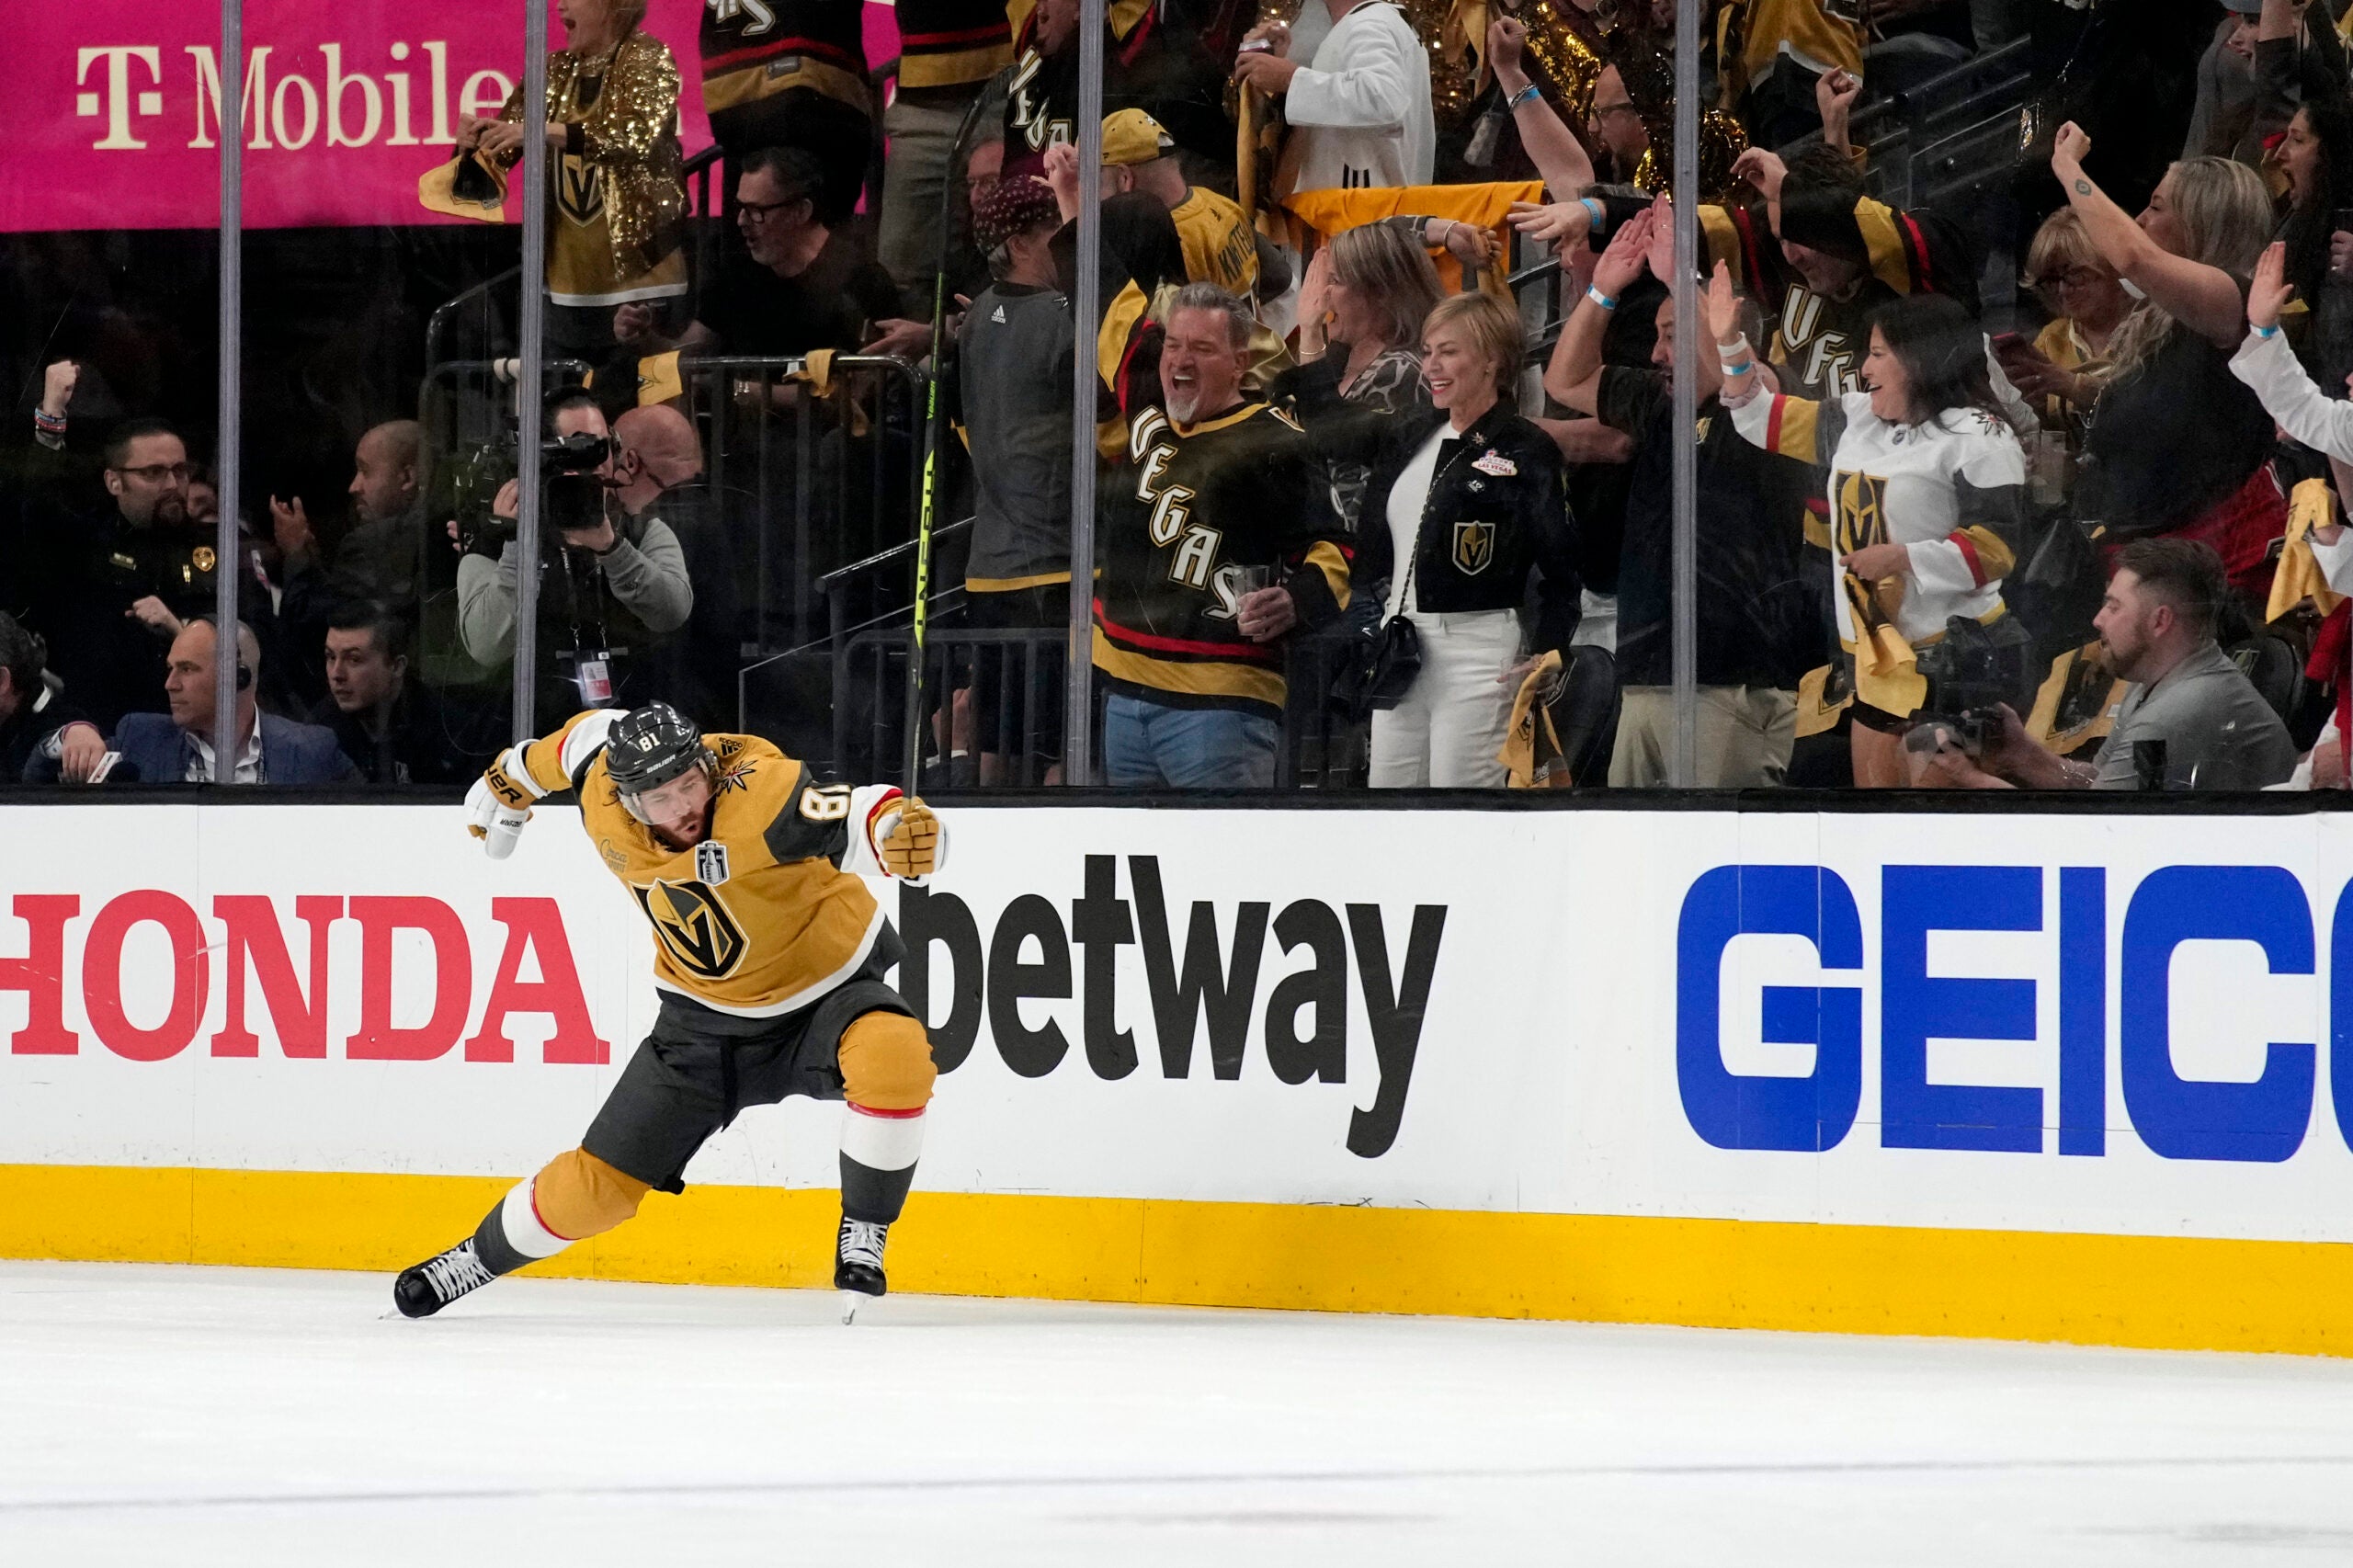 Vegas Golden Knights right wing Jonathan Marchessault (81) celebrates his goal against the Florida Panthers during the first period of Game 2 of the NHL hockey Stanley Cup Finals.